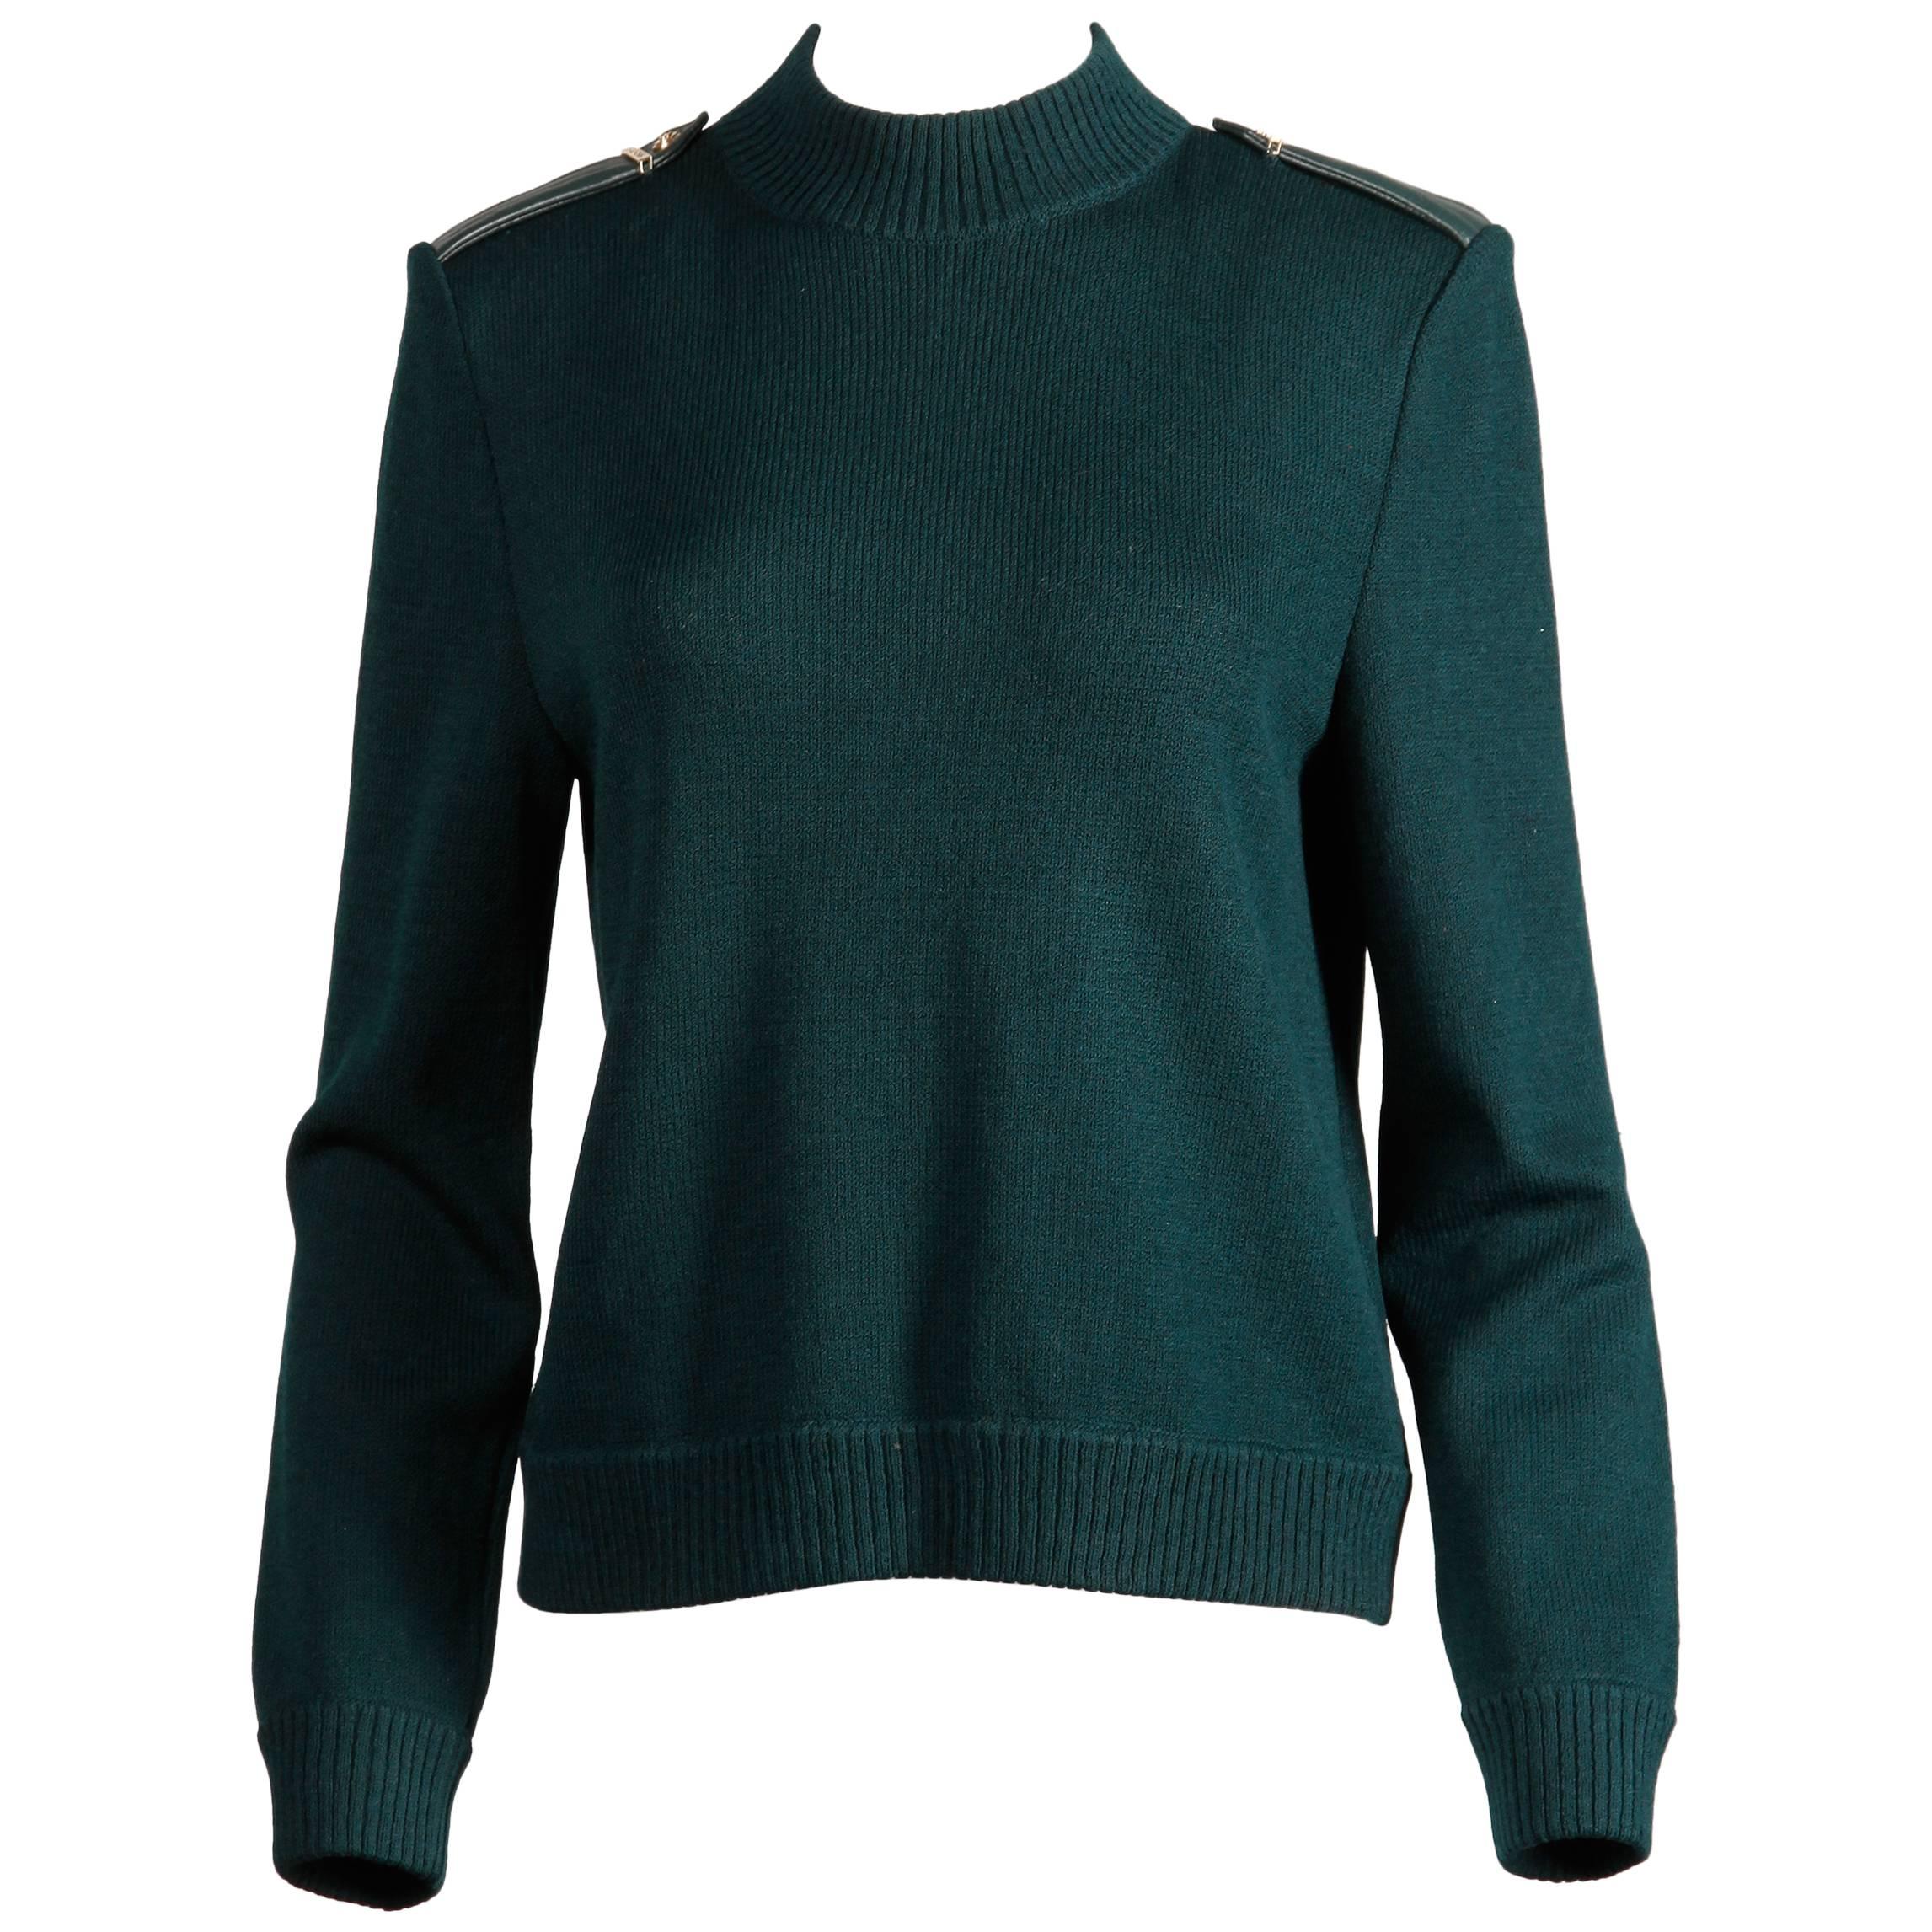 St. John by Marie Gray Dark Green Knit Sweater with Soft Leather Epaulettes